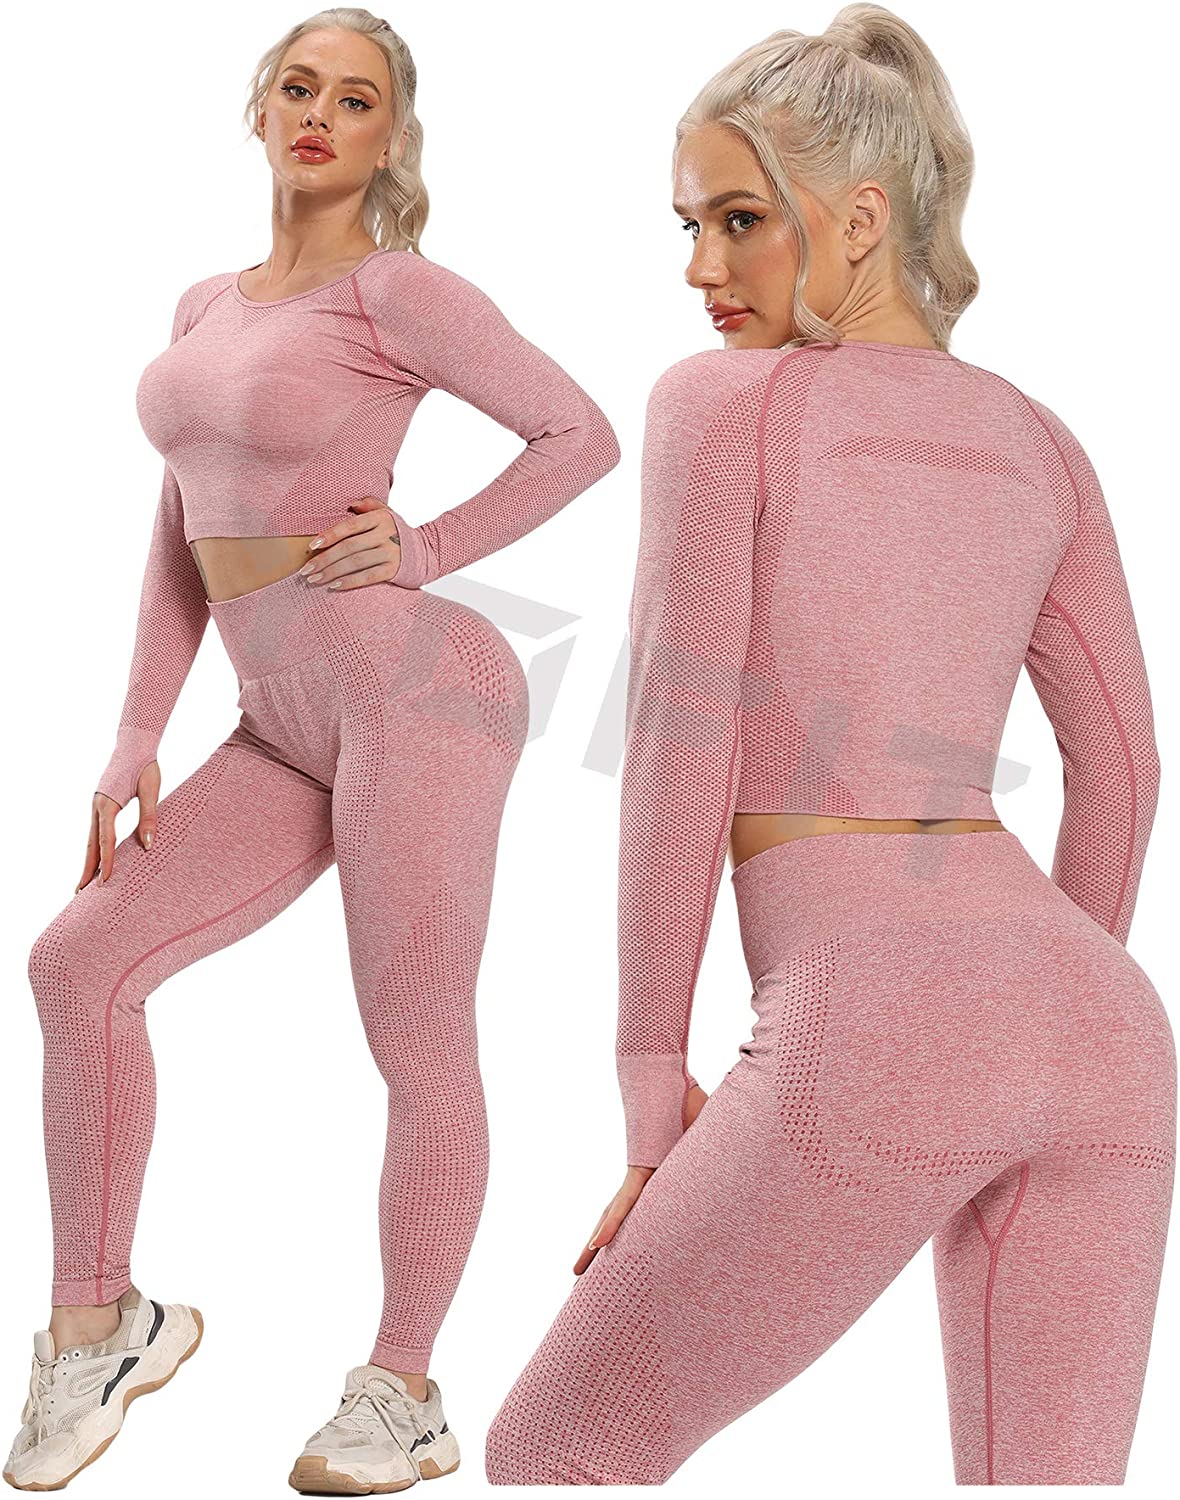 Women's Two Piece Cropped Jogging Suit - Long Sleeves / Cuffed Pants / Pink